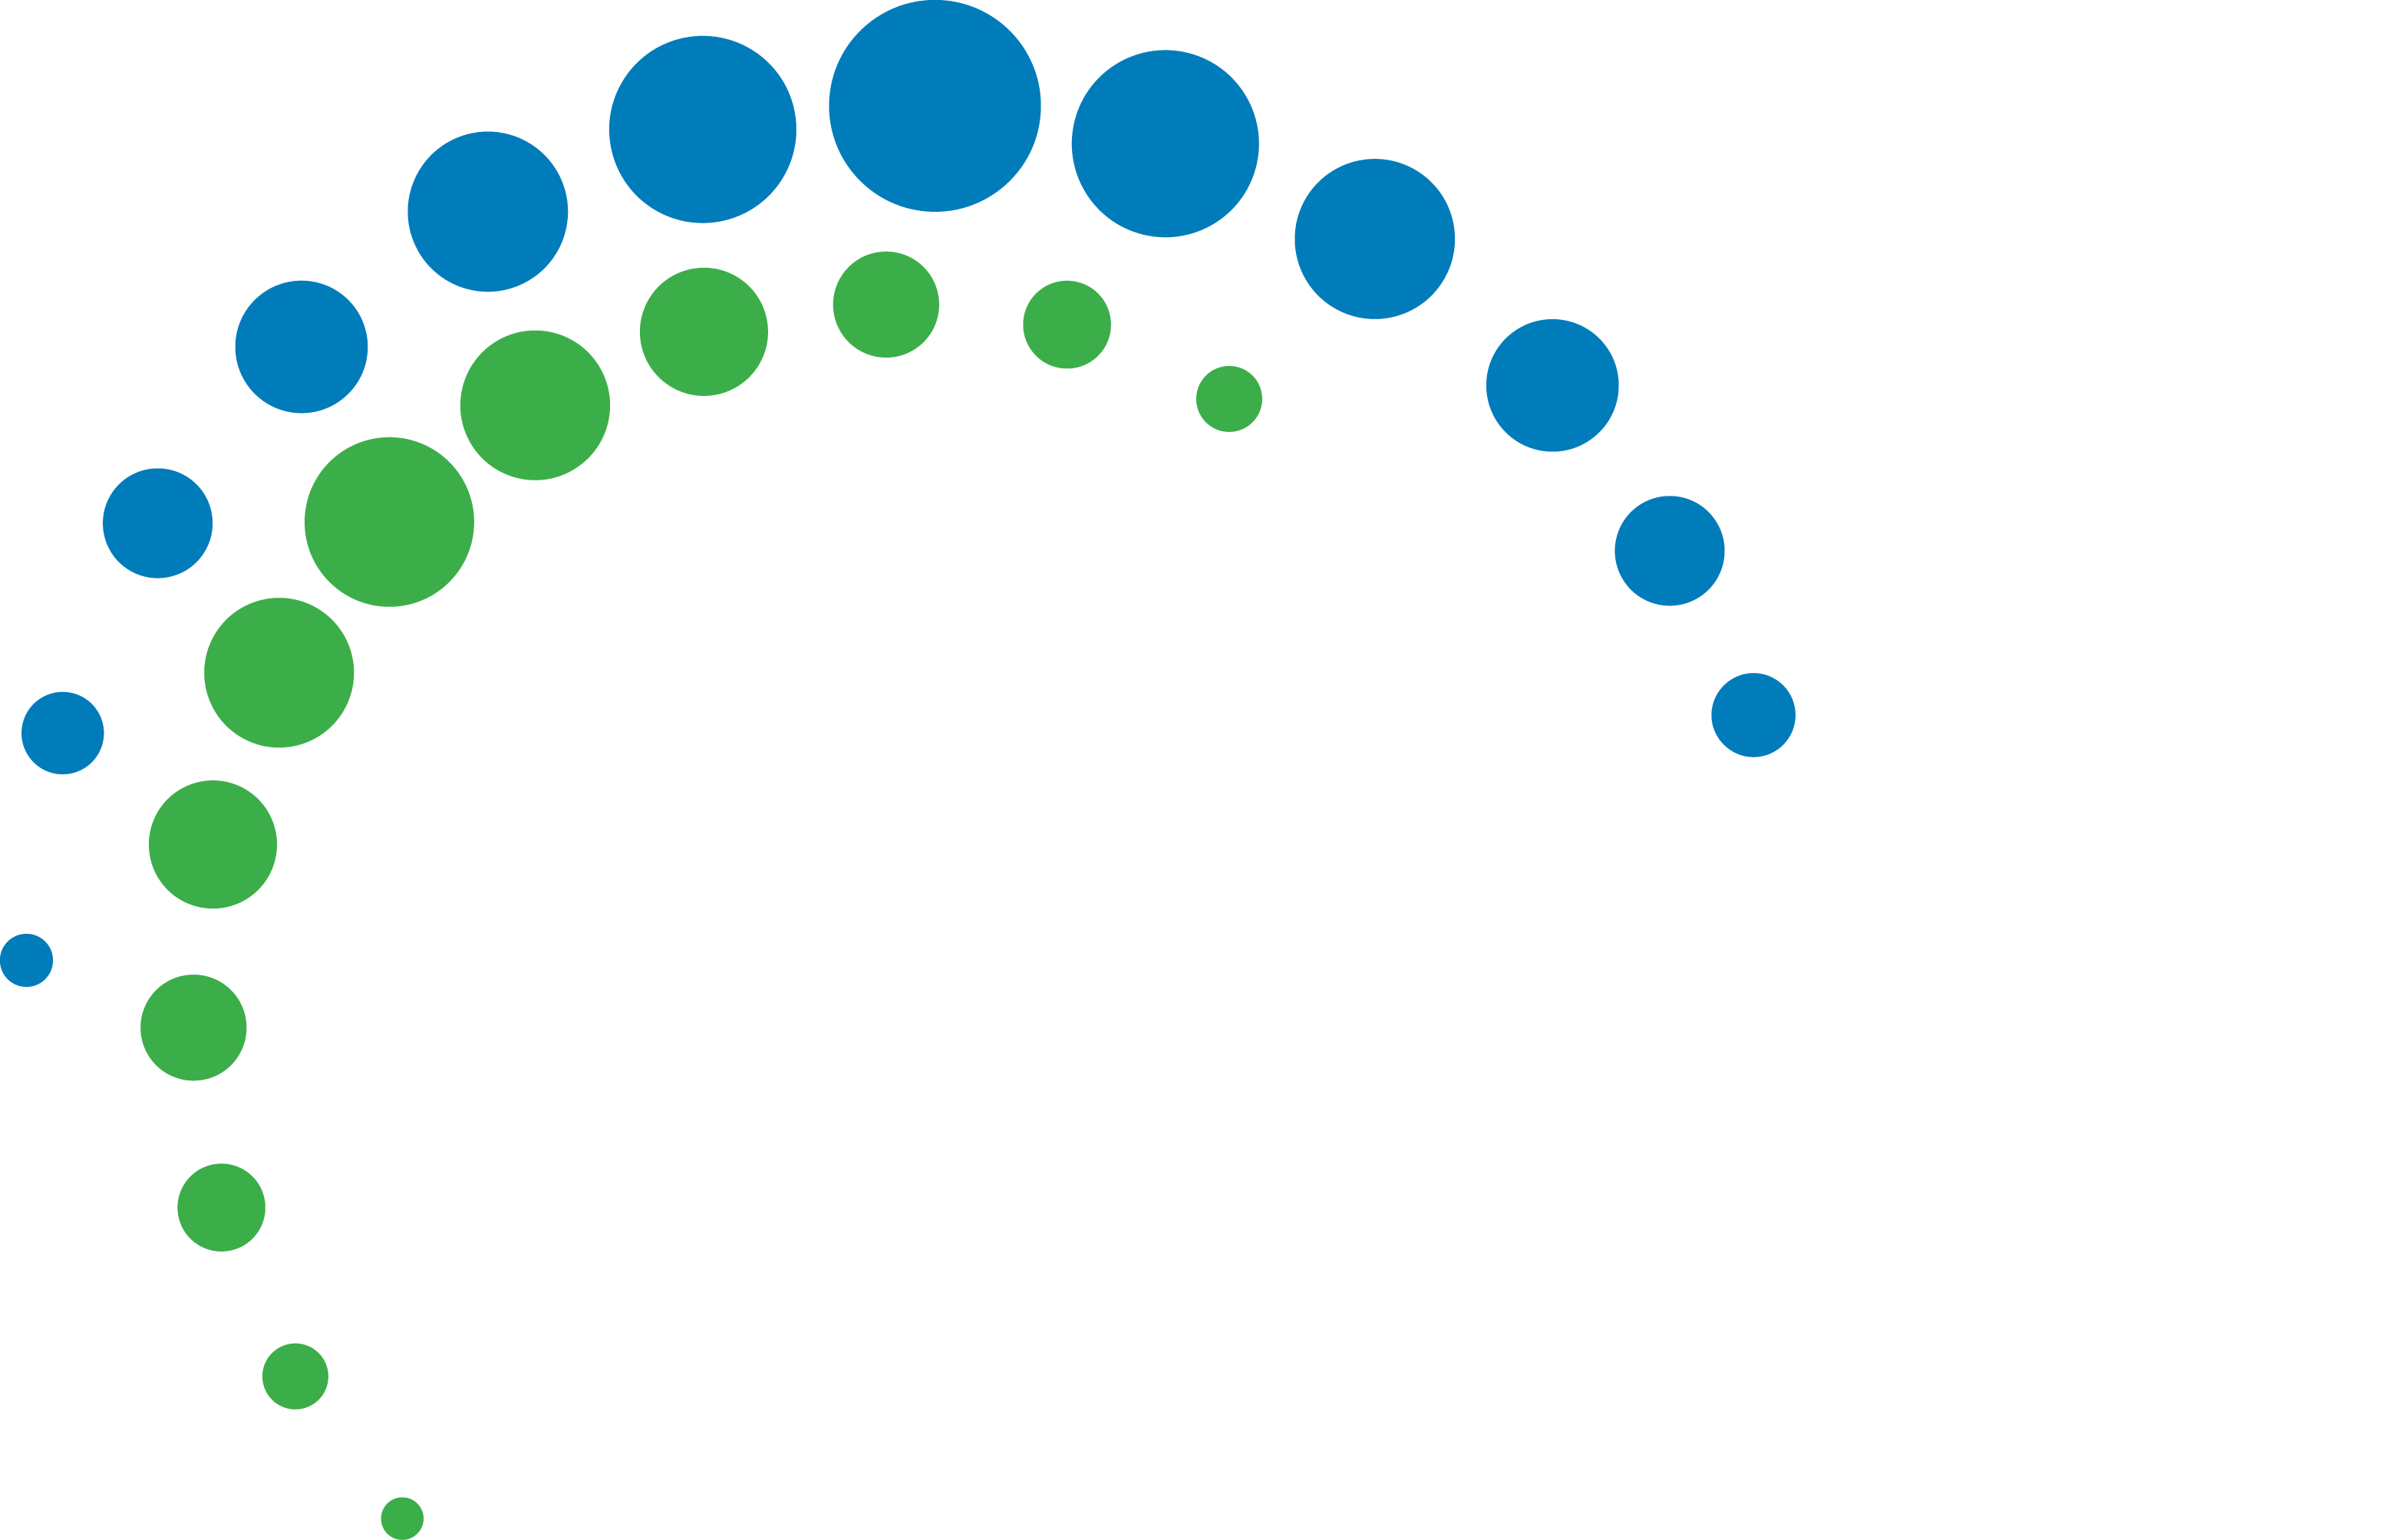 INSPIRE Event Solutions